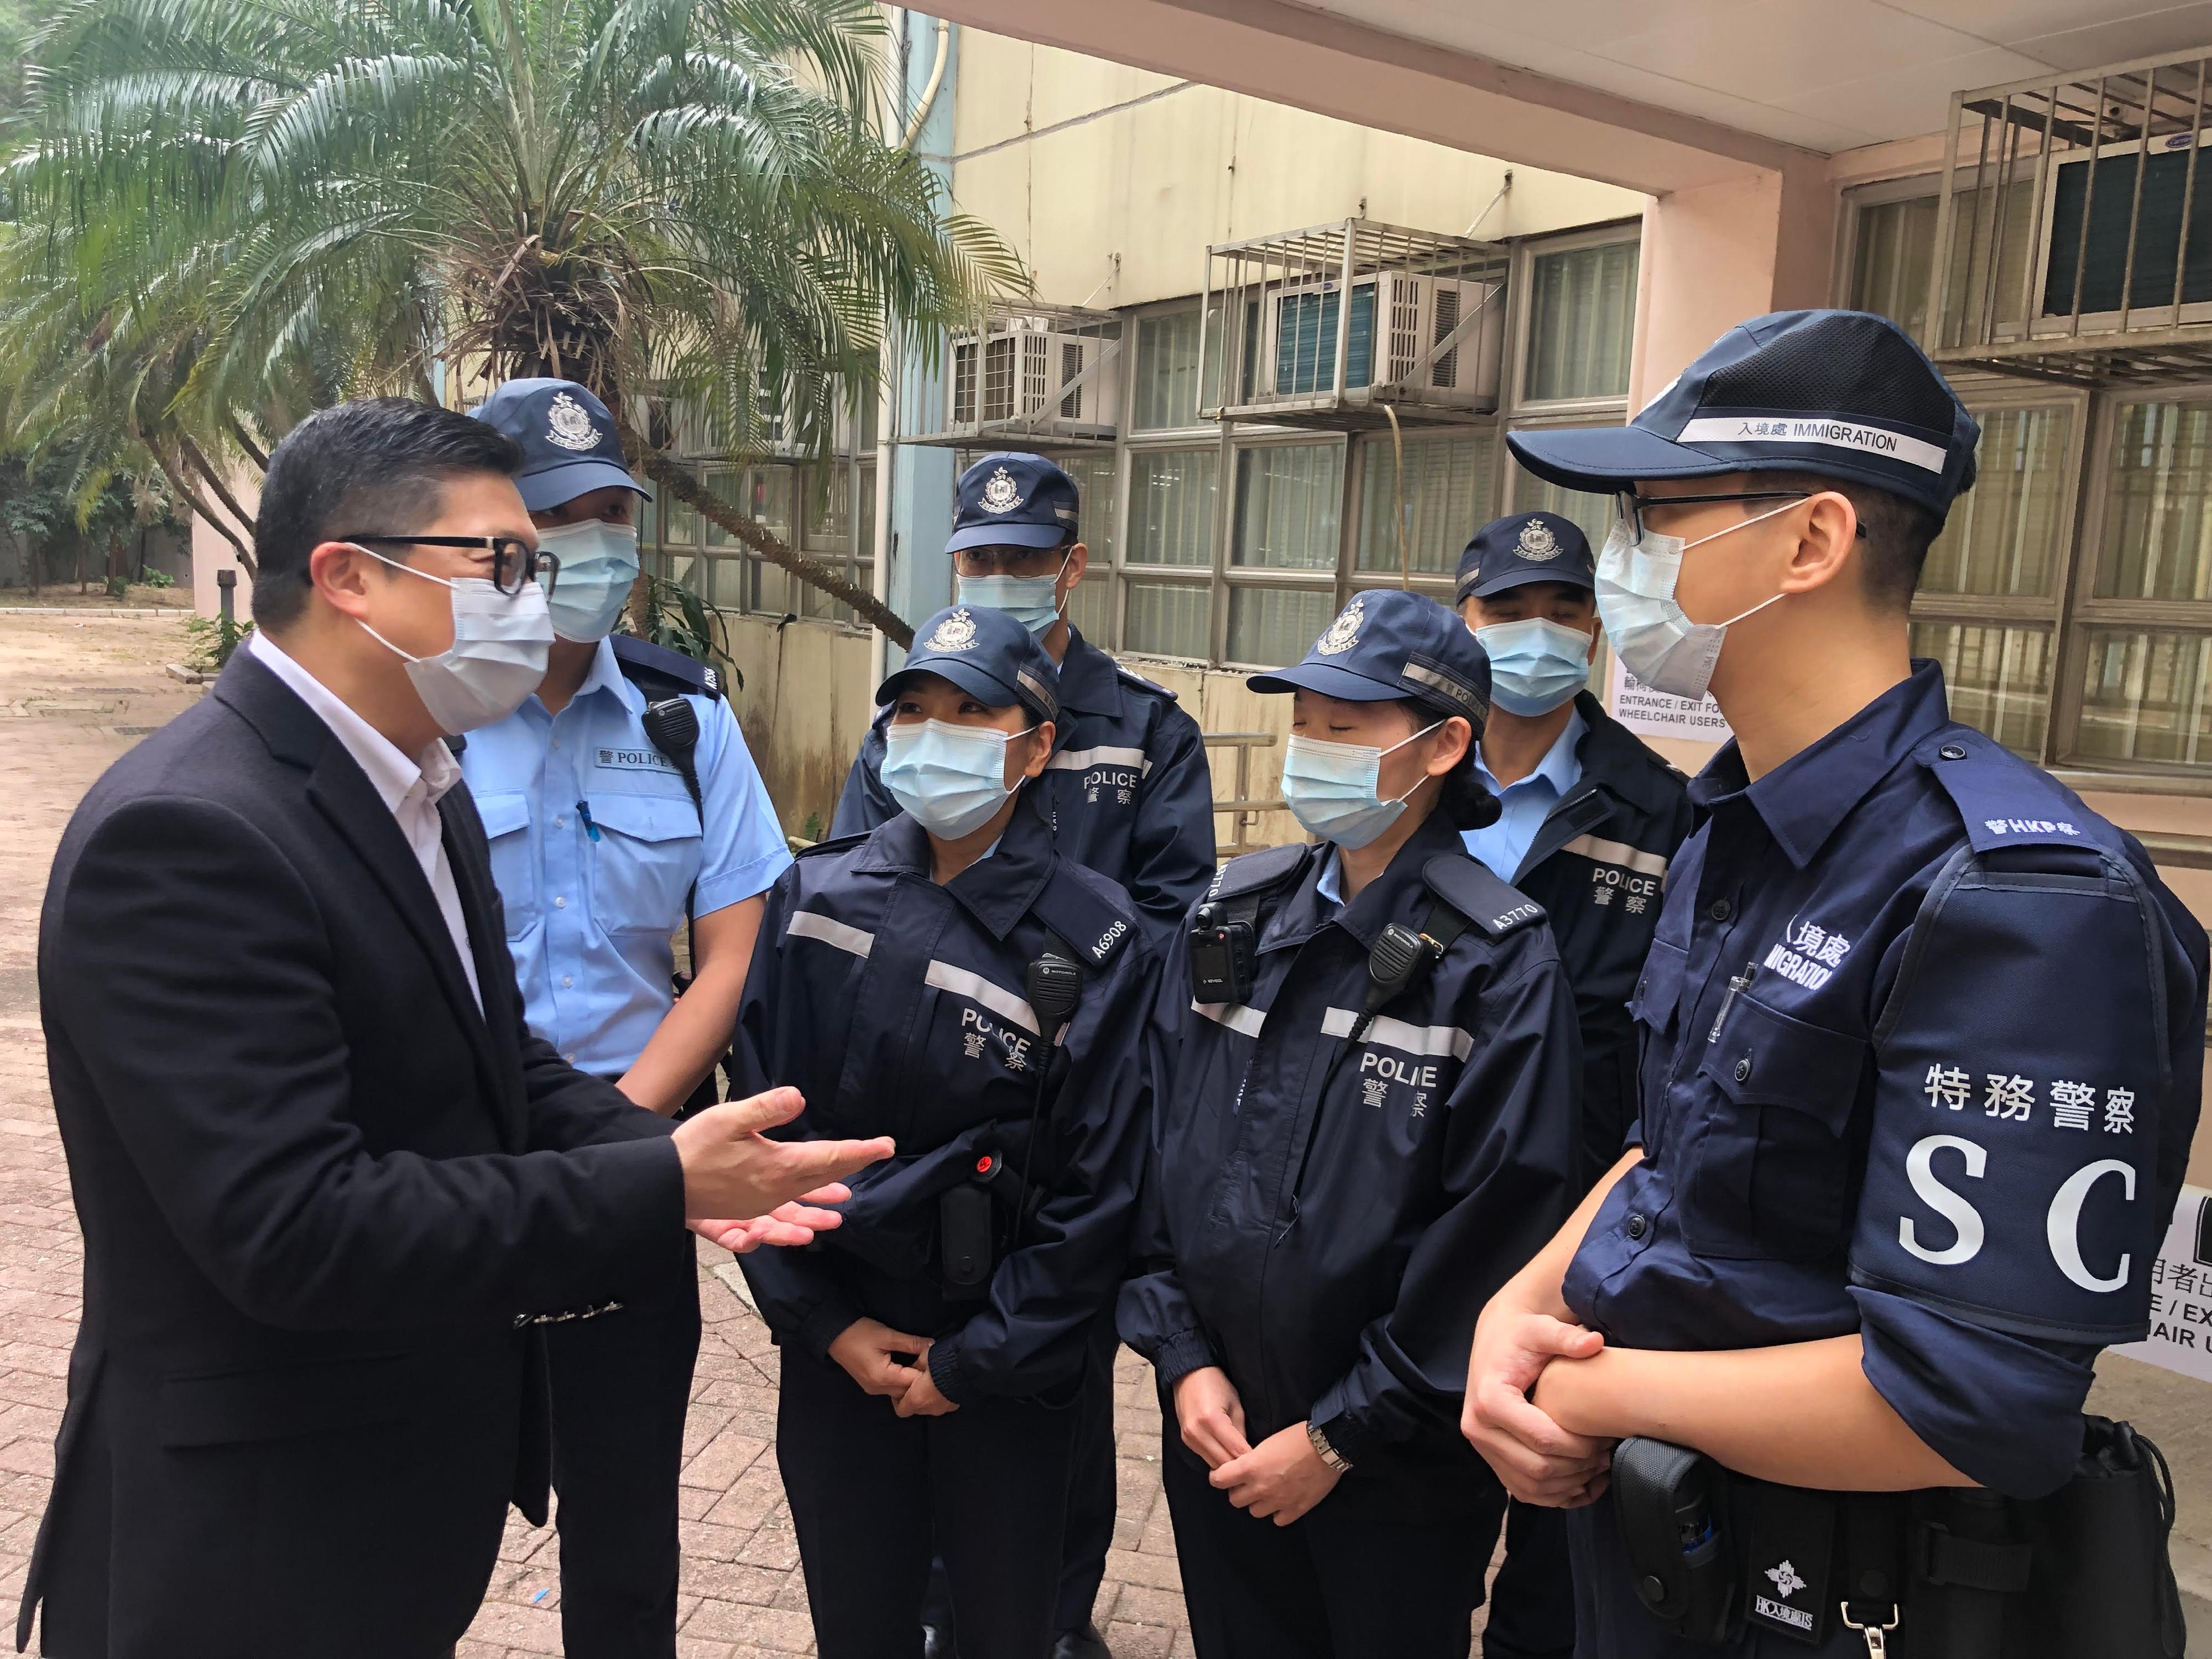 The 2021 Legislative Council General Election is held today (December 19). The Secretary for Security, Mr Tang Ping-keung, visited polling stations in various districts and the Emergency Monitoring and Support Centre of the Security Bureau activated for the election soon after he voted this morning to ensure safe and orderly conduct of the election. Photo shows Mr Tang (first left) having a conversation with the Special Constables stationed at a polling station in Wong Tai Sin and giving them words of encouragement.